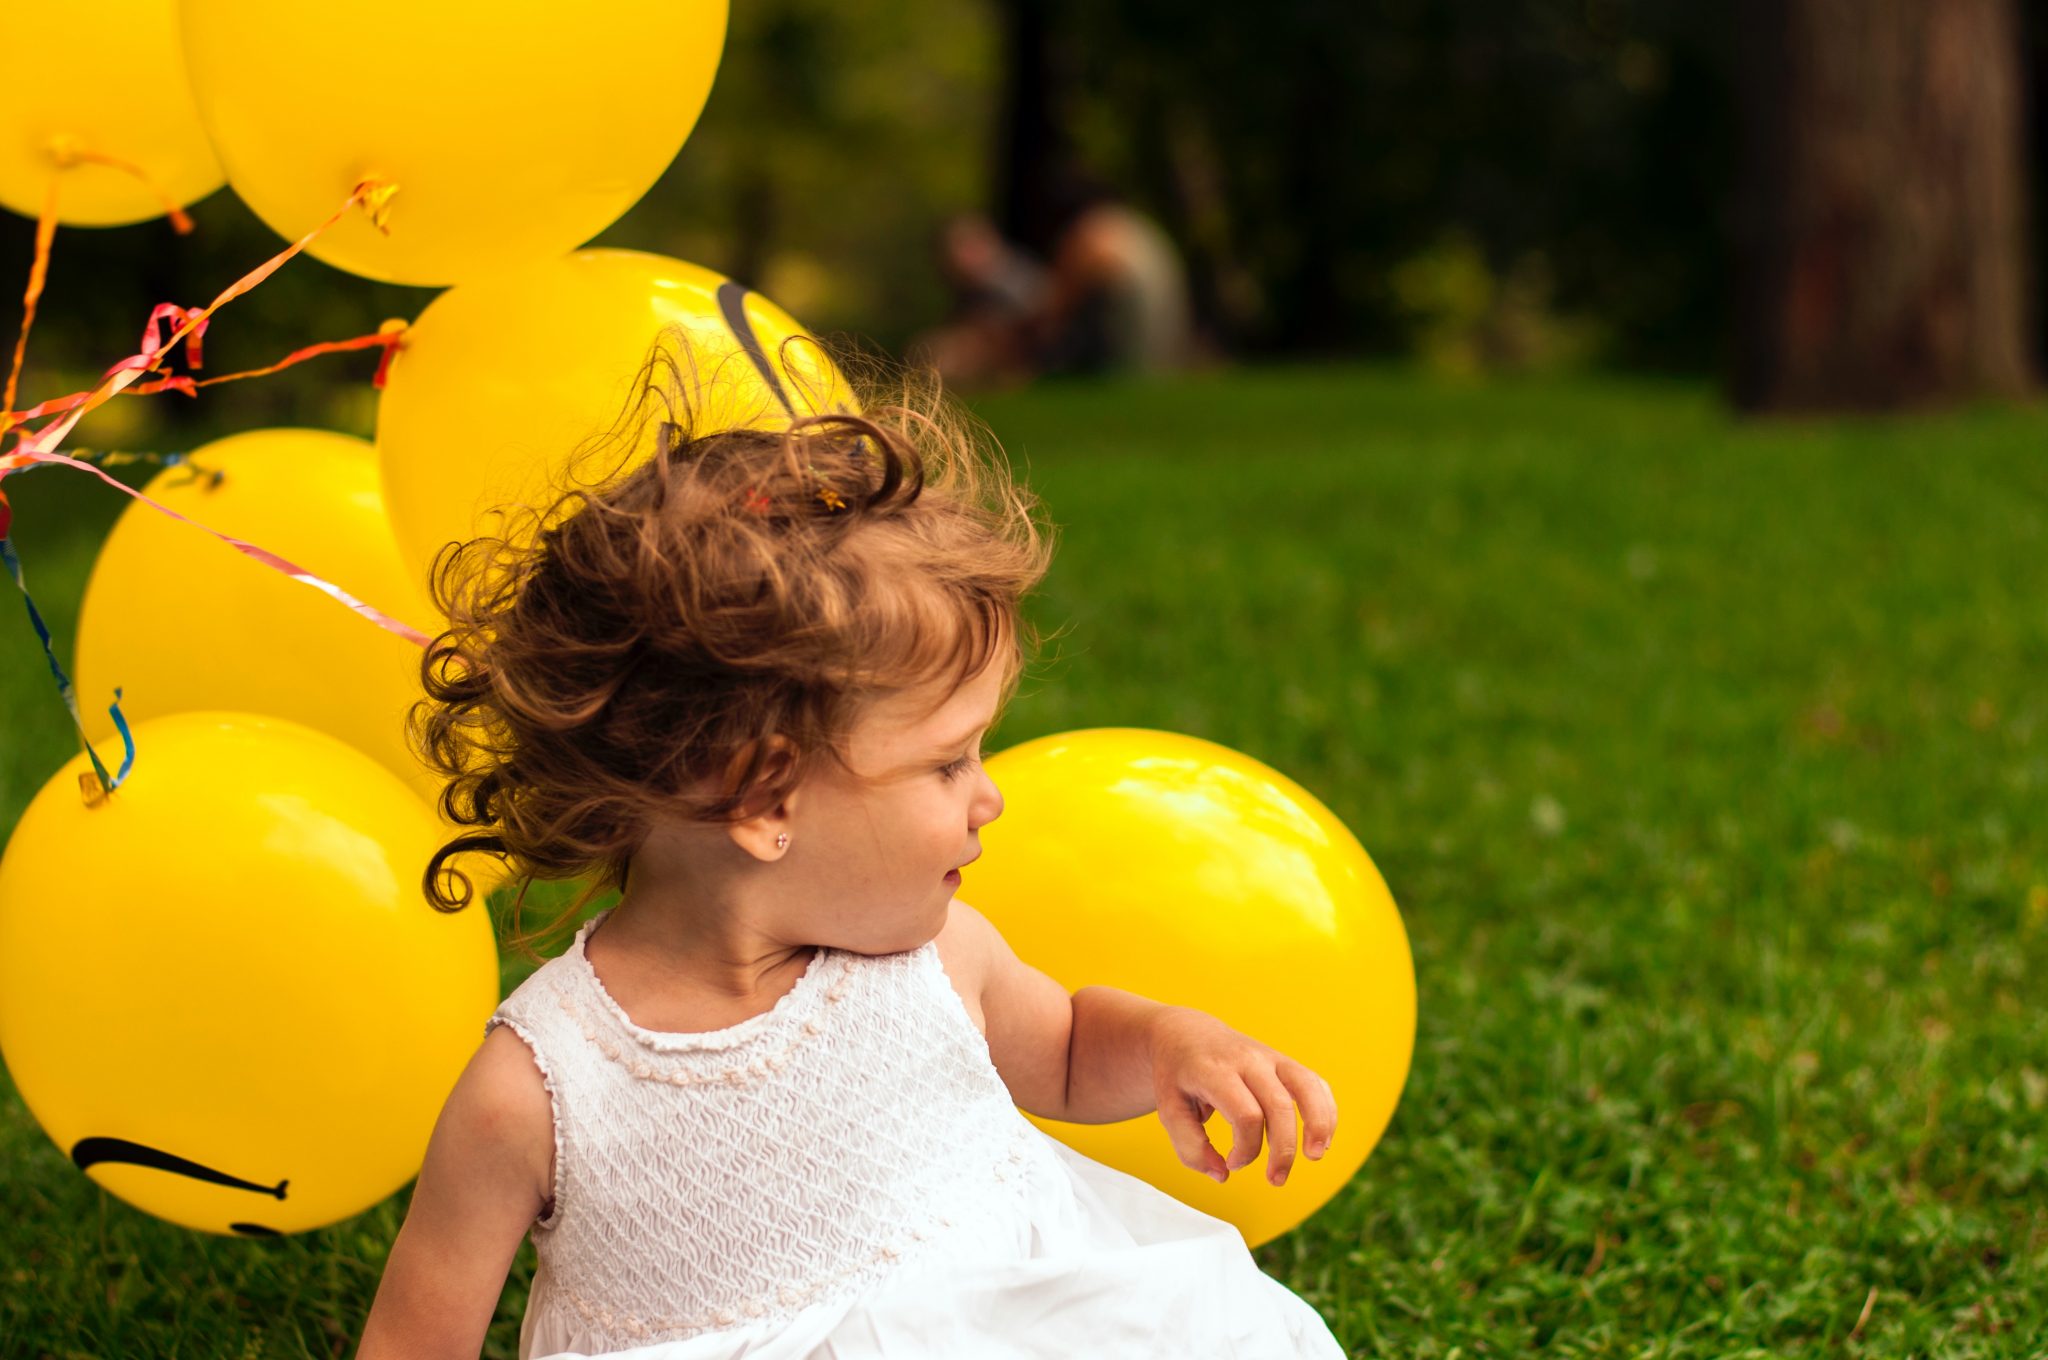 Little girl in white dress on grass background next to bunch of yellow balloons